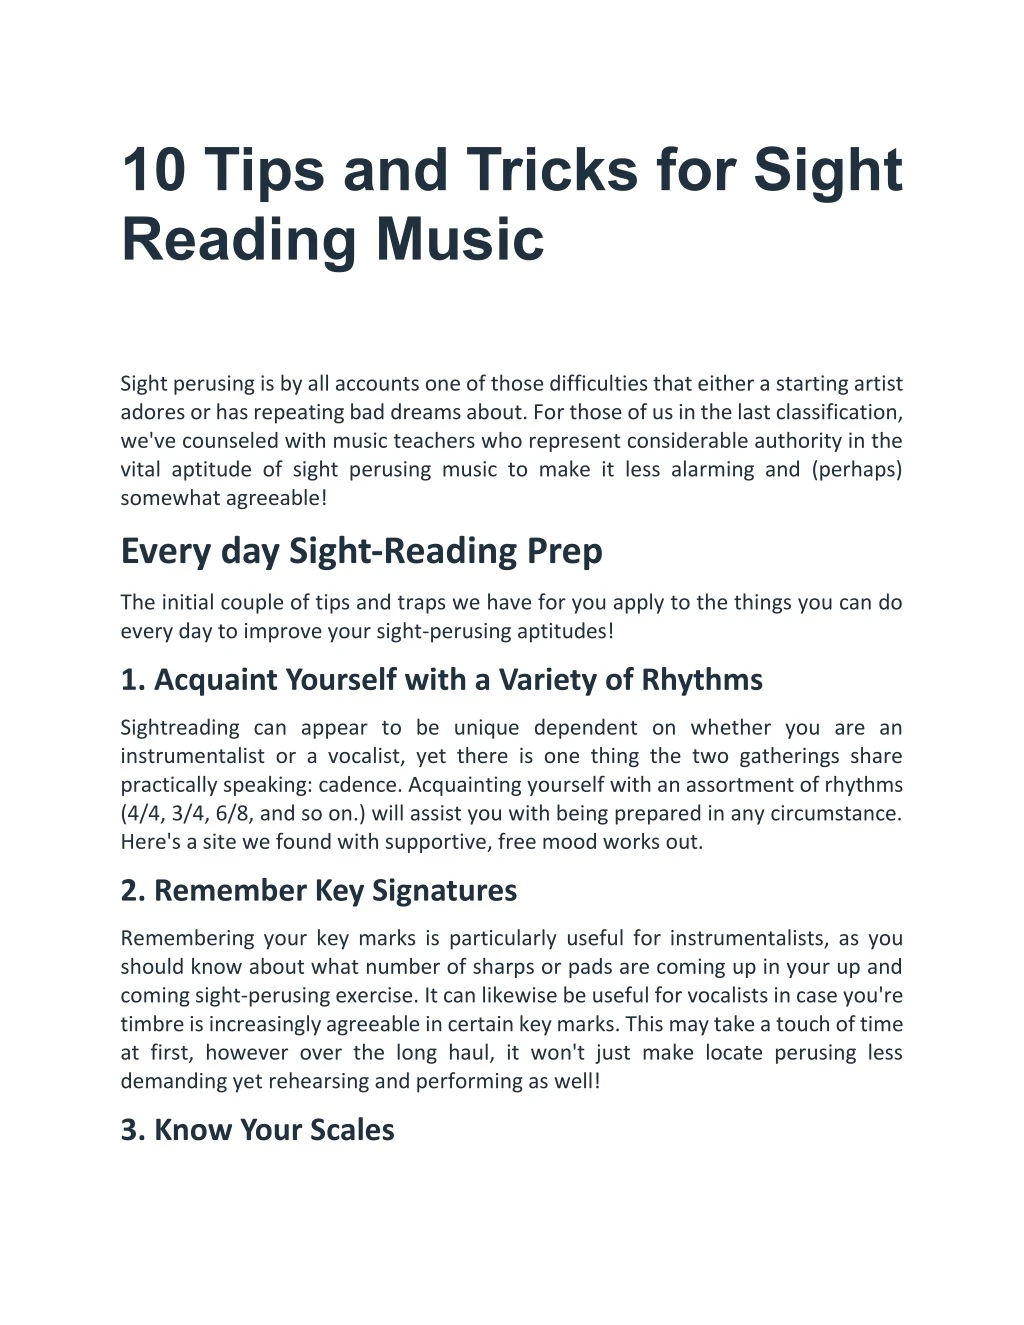 10 tips and tricks for sight reading music